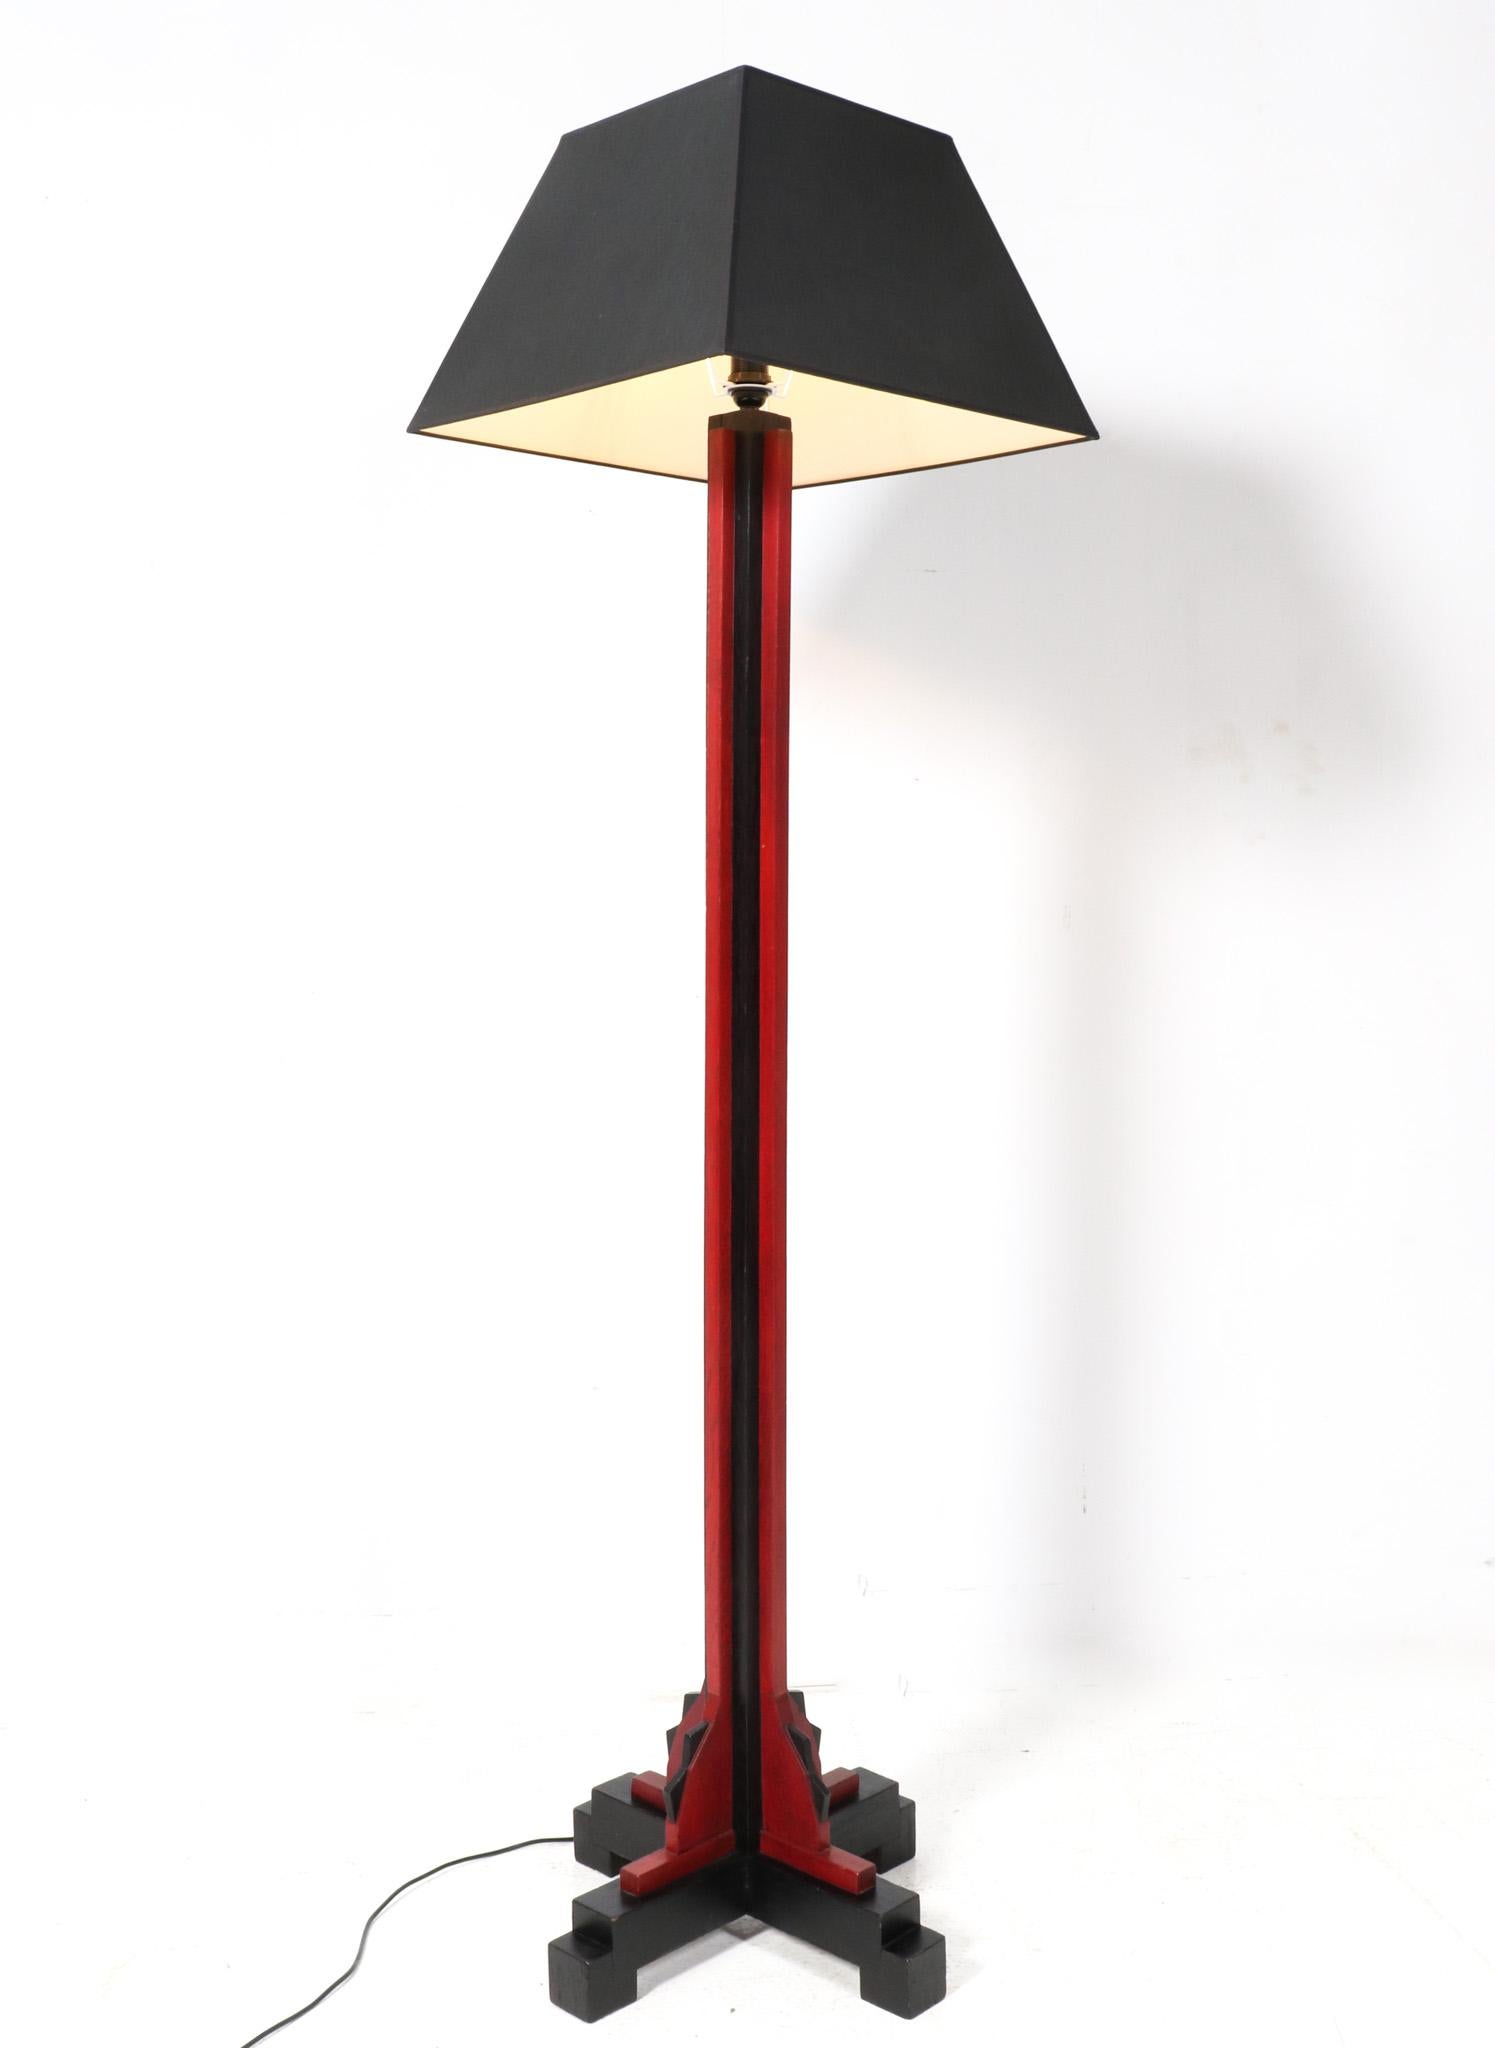 Early 20th Century Lacquered Oak Art Deco Modernist Floor Lamp by Cor Alons, 1920s For Sale